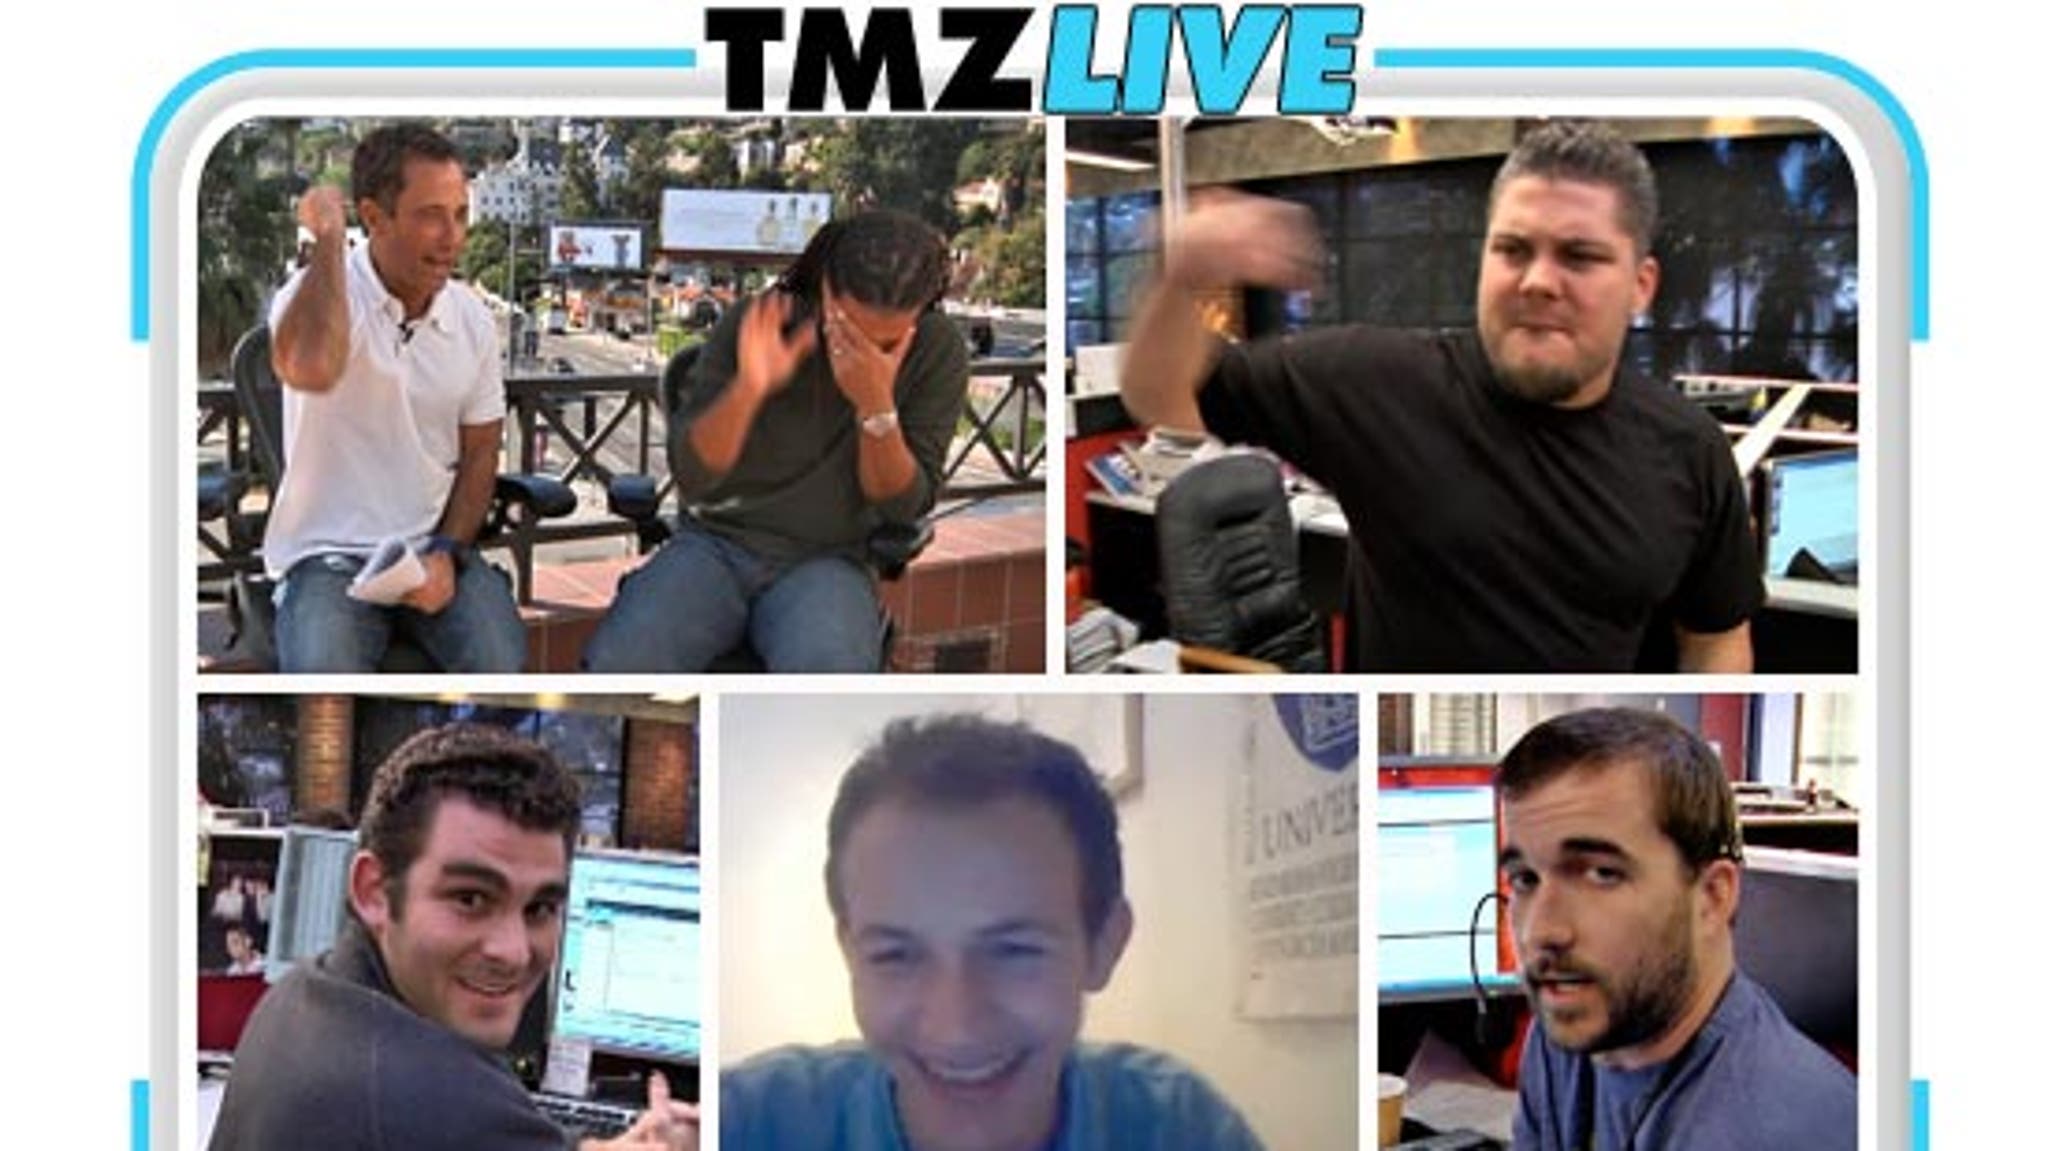 TMZ Live -- Breaking News and Bustin Moves photo pic